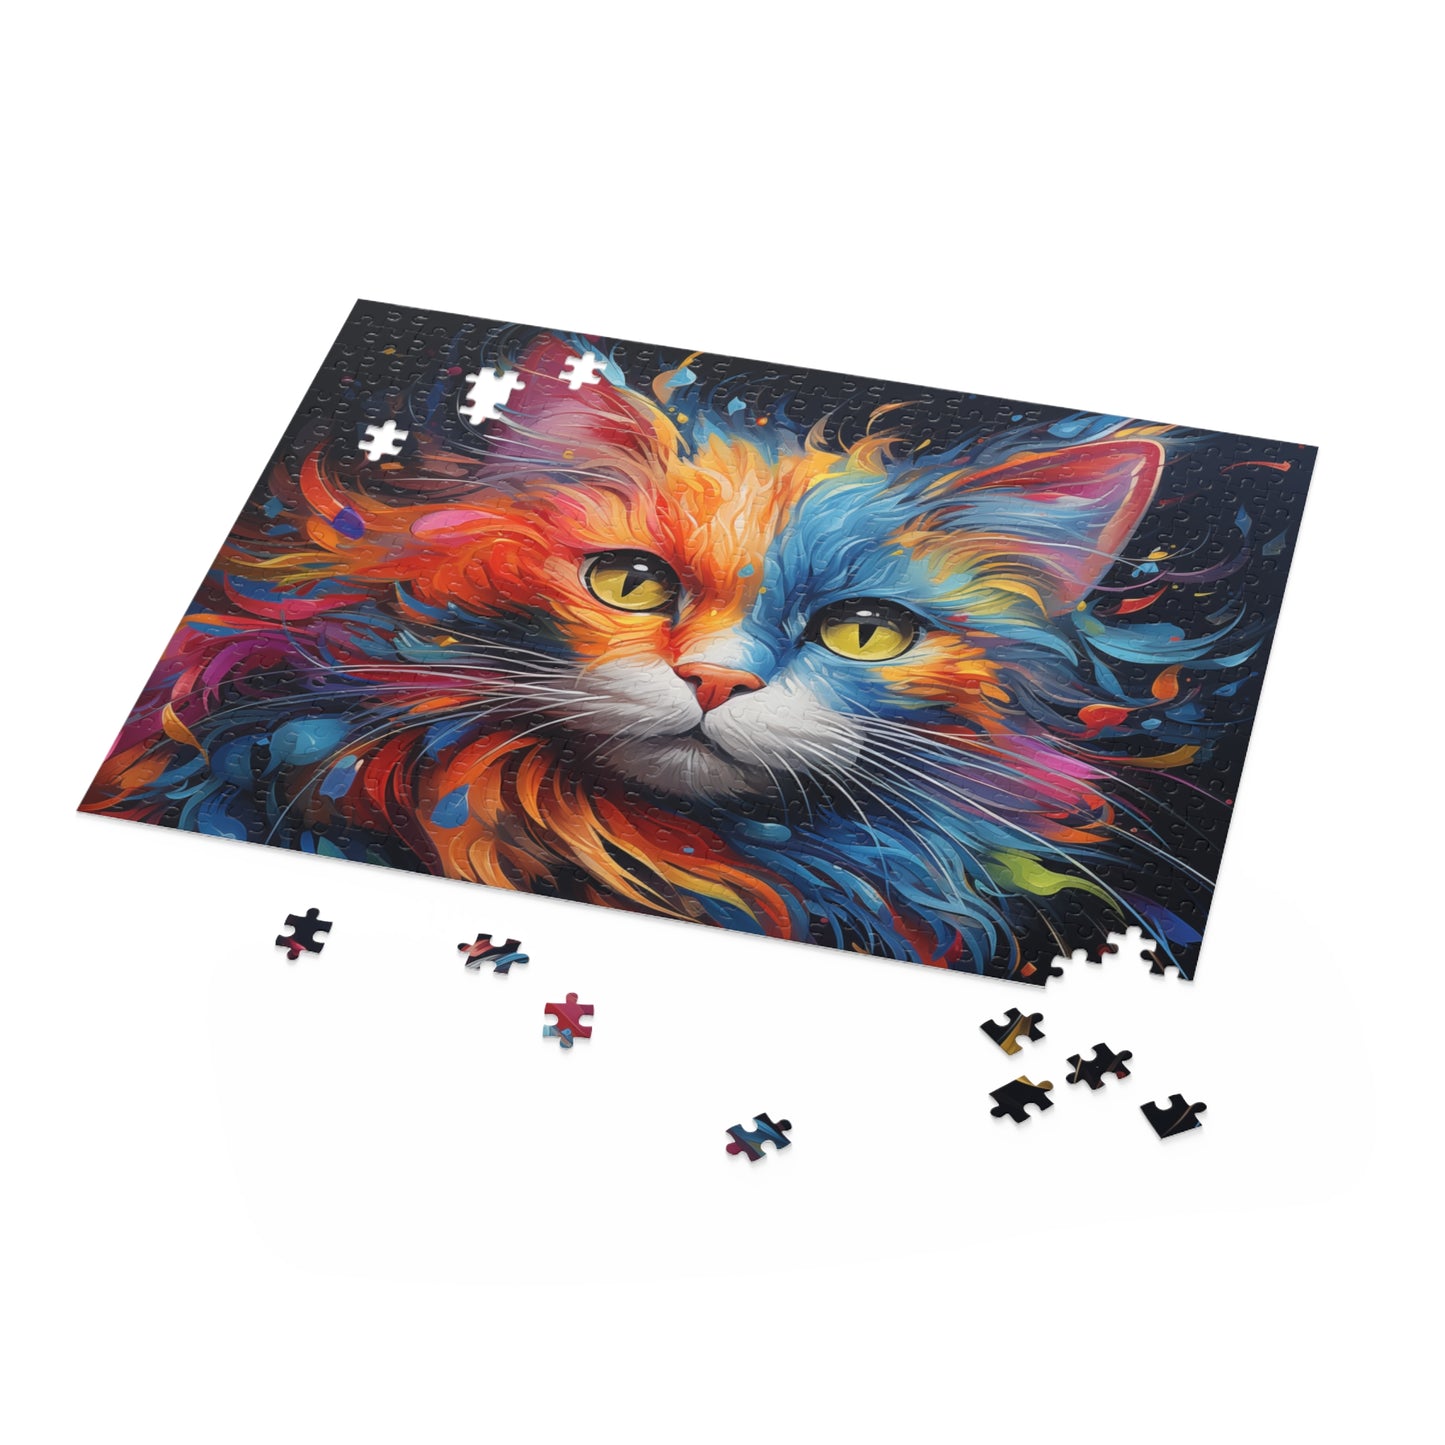 Abstract Watercolor Animal Cat Oil Paint Jigsaw Puzzle Adult Birthday Business Jigsaw Puzzle Gift for Him Funny Humorous Indoor Outdoor Game Gift For Her Online-5